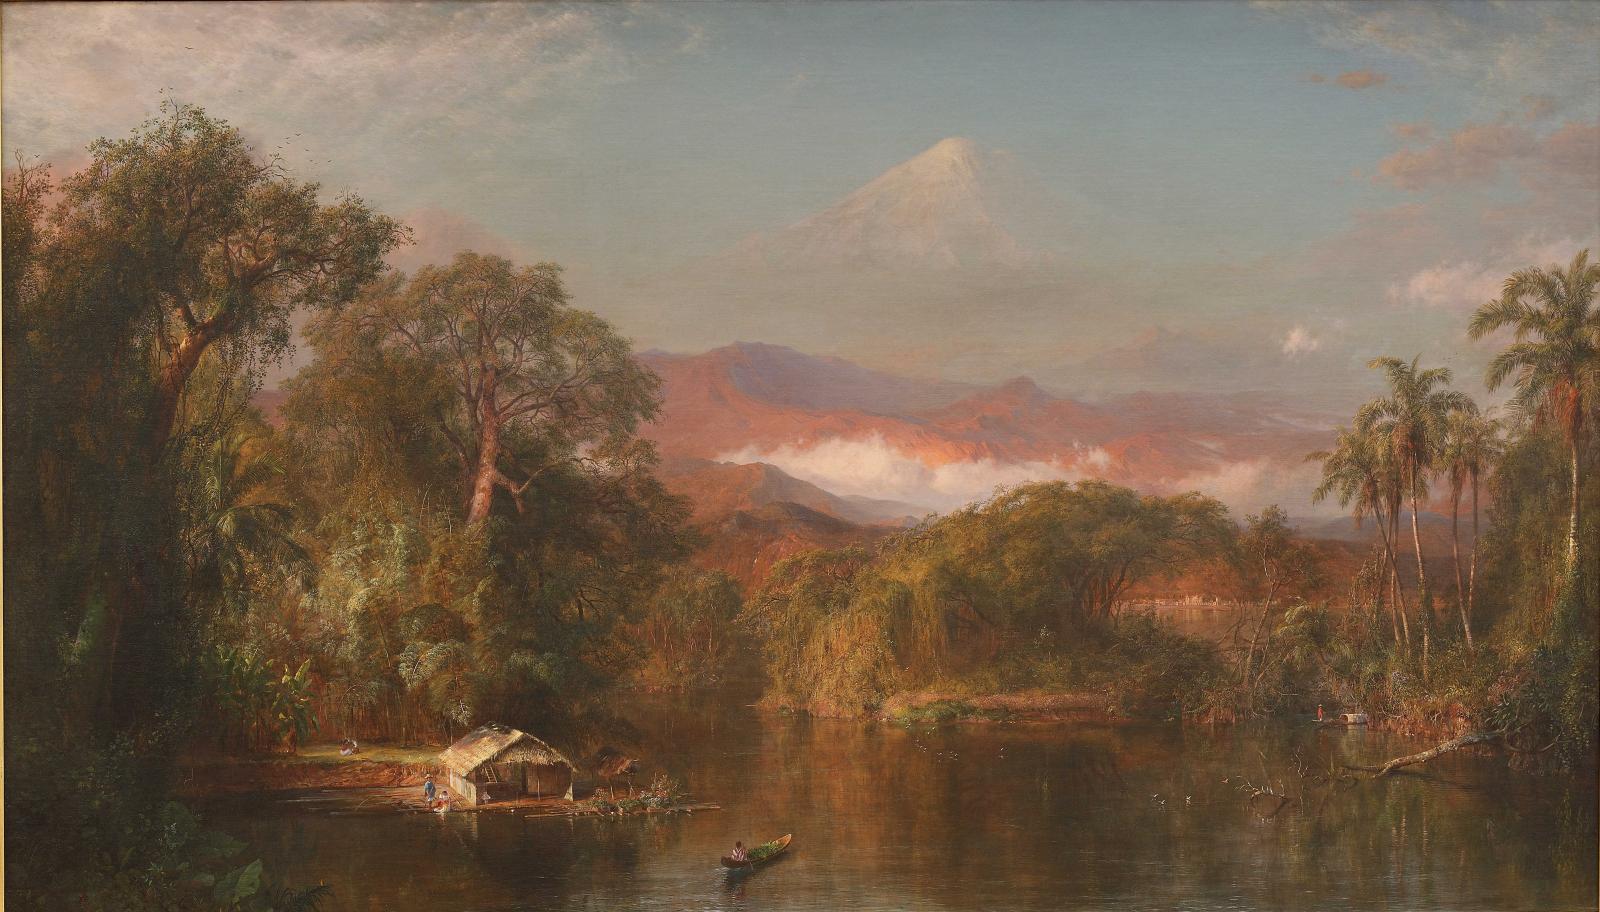 Painting with a reddish mountain in the background, hills in the midground, and trees and water in the foreground.